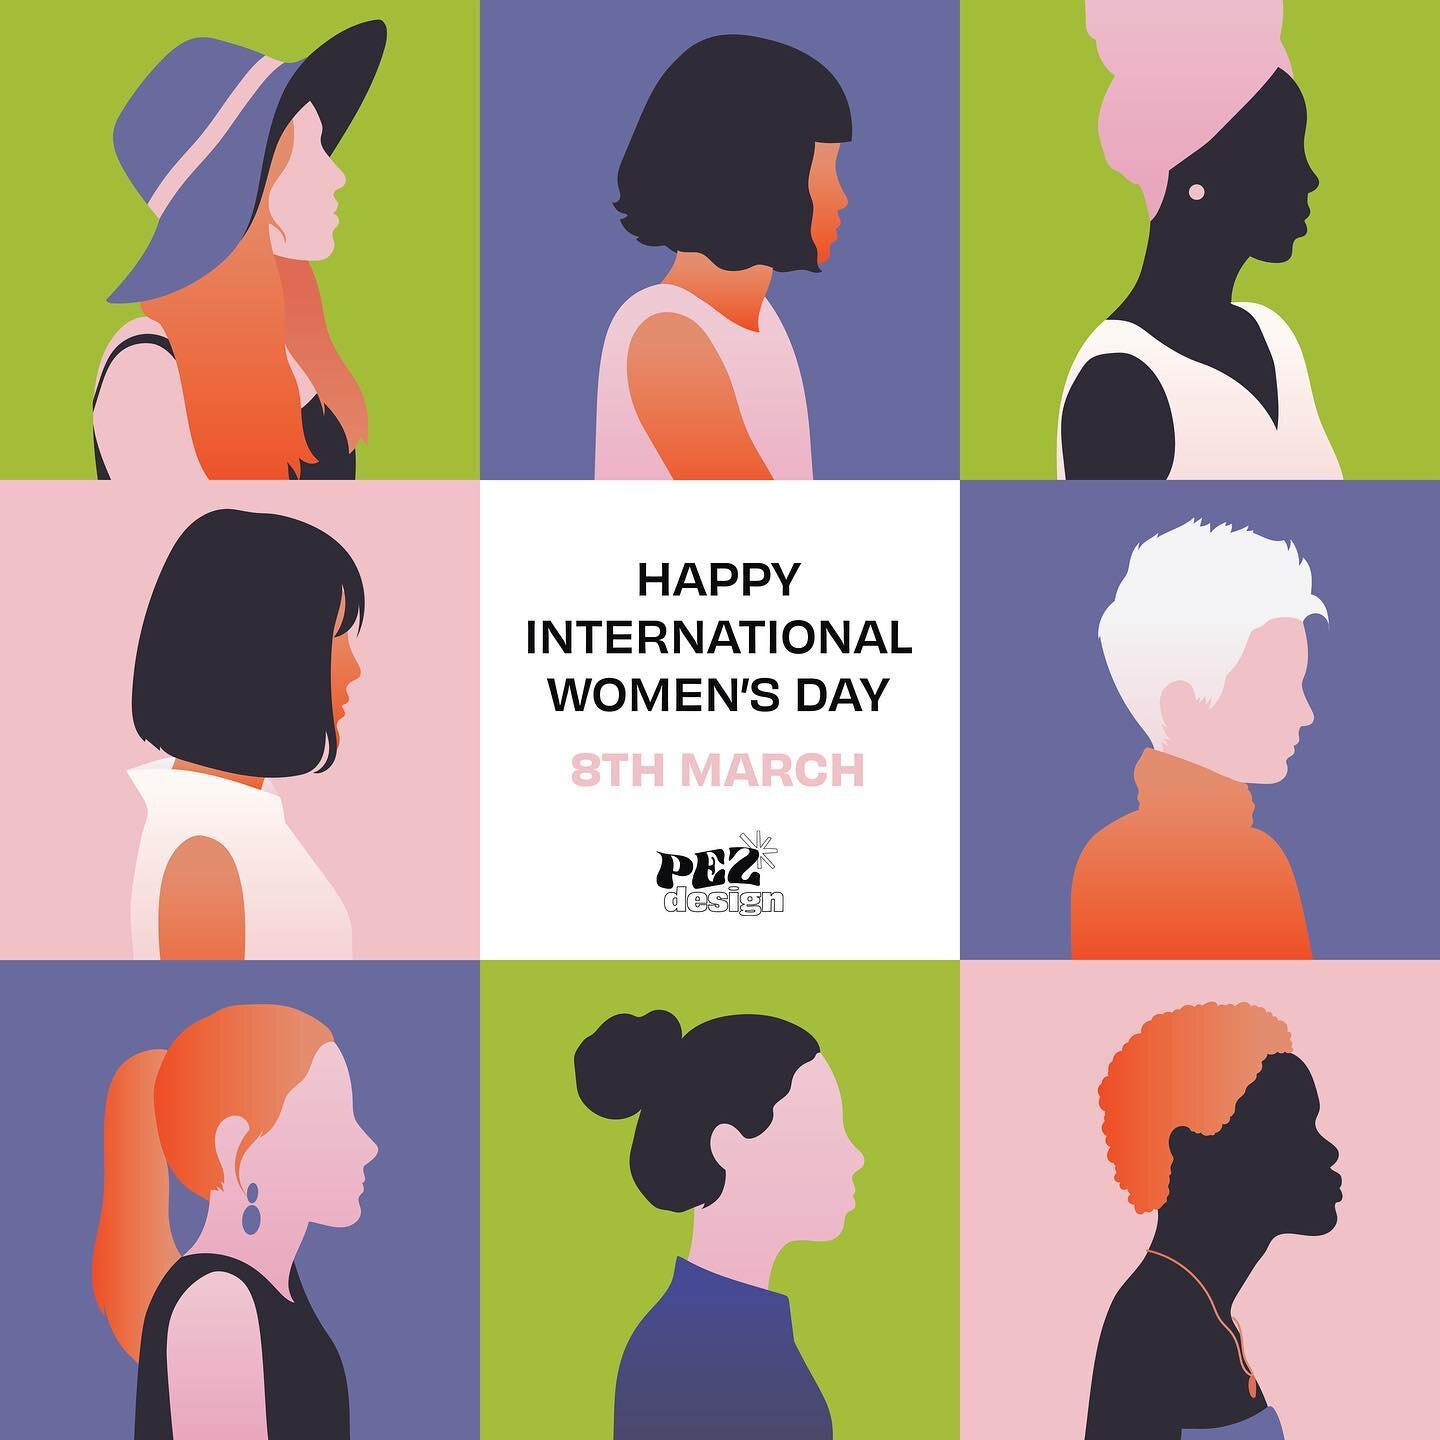 Today and every day, we celebrate the strength, resilience, and accomplishments of women around the world. As a female-owned small business, we are proud to stand with our fellow women and uplift their voices. Happy International Women's Day! ❤️&zwj;